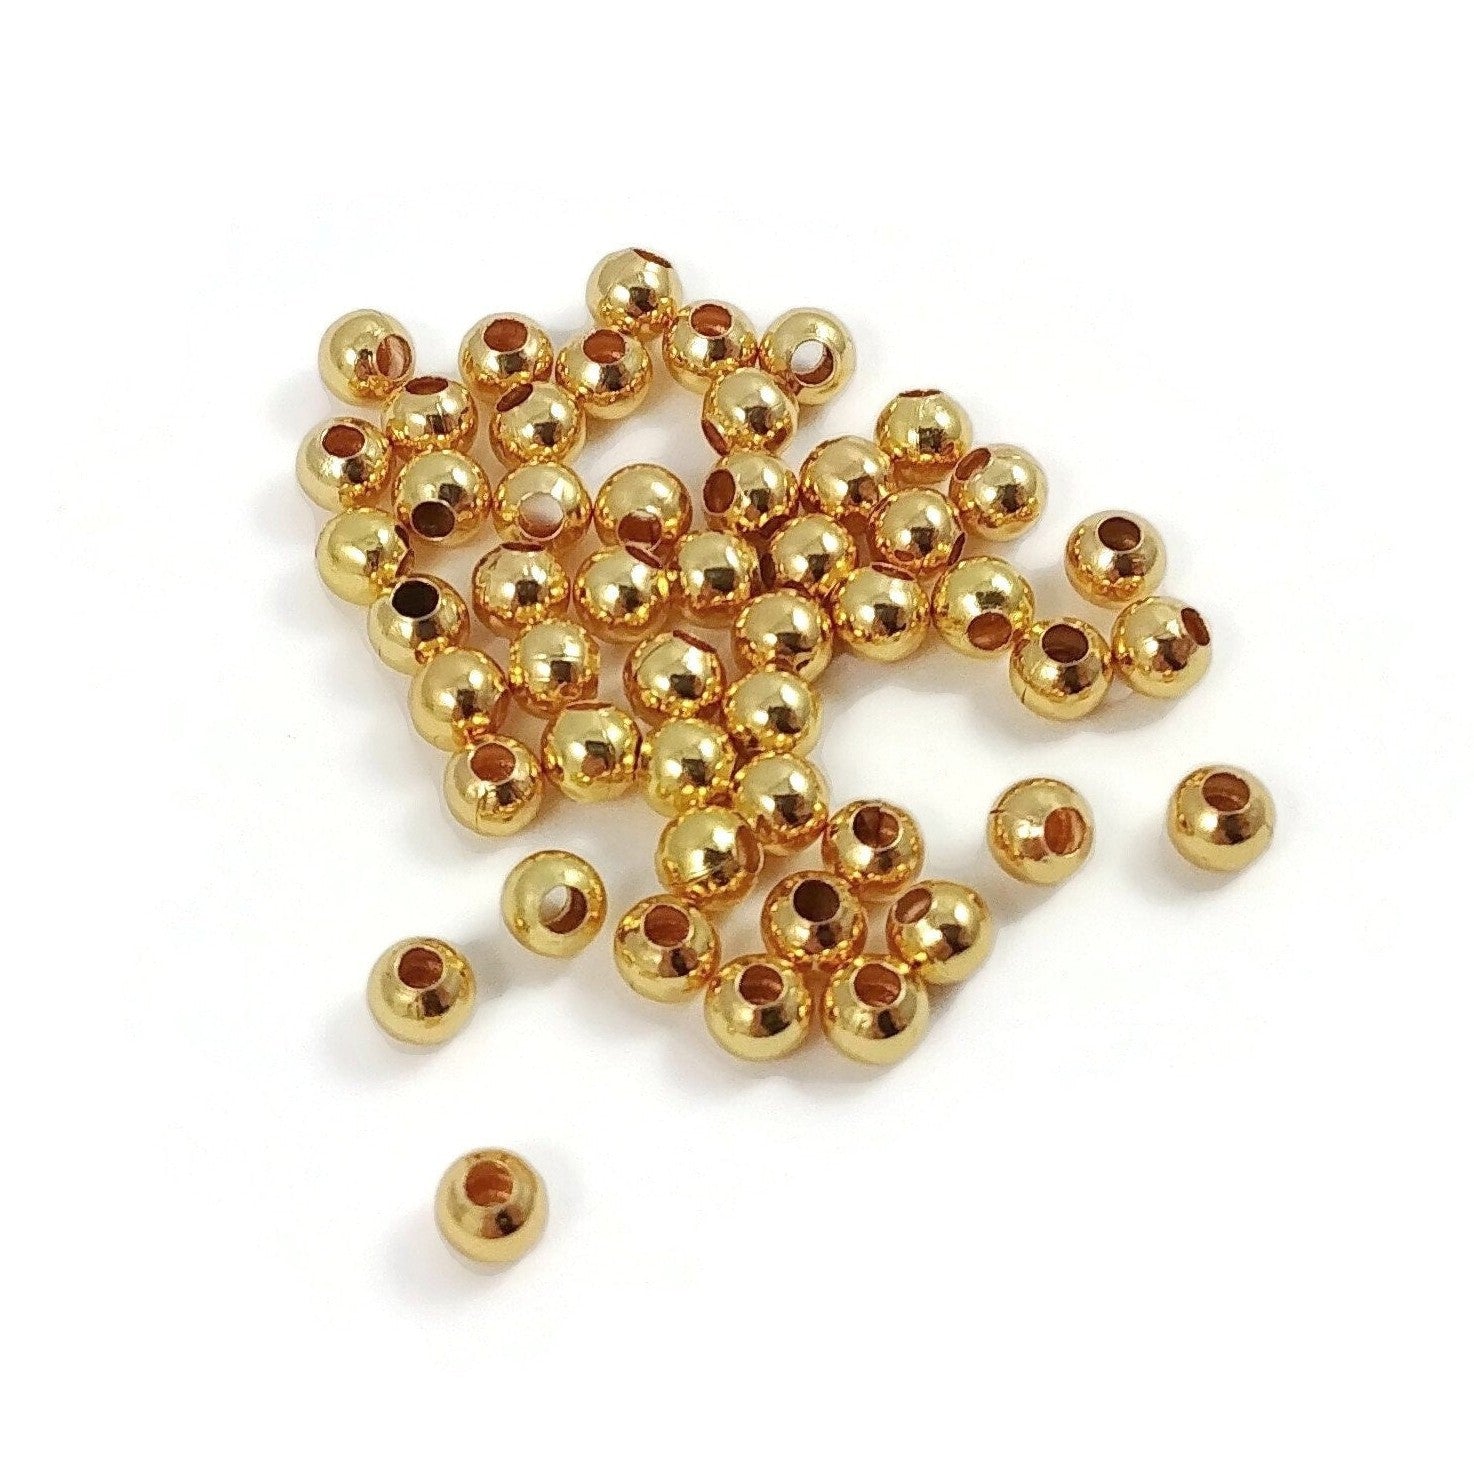 2mm gold crimp tube beads, Nickel free, Hypoallergenic jewelry making  findings